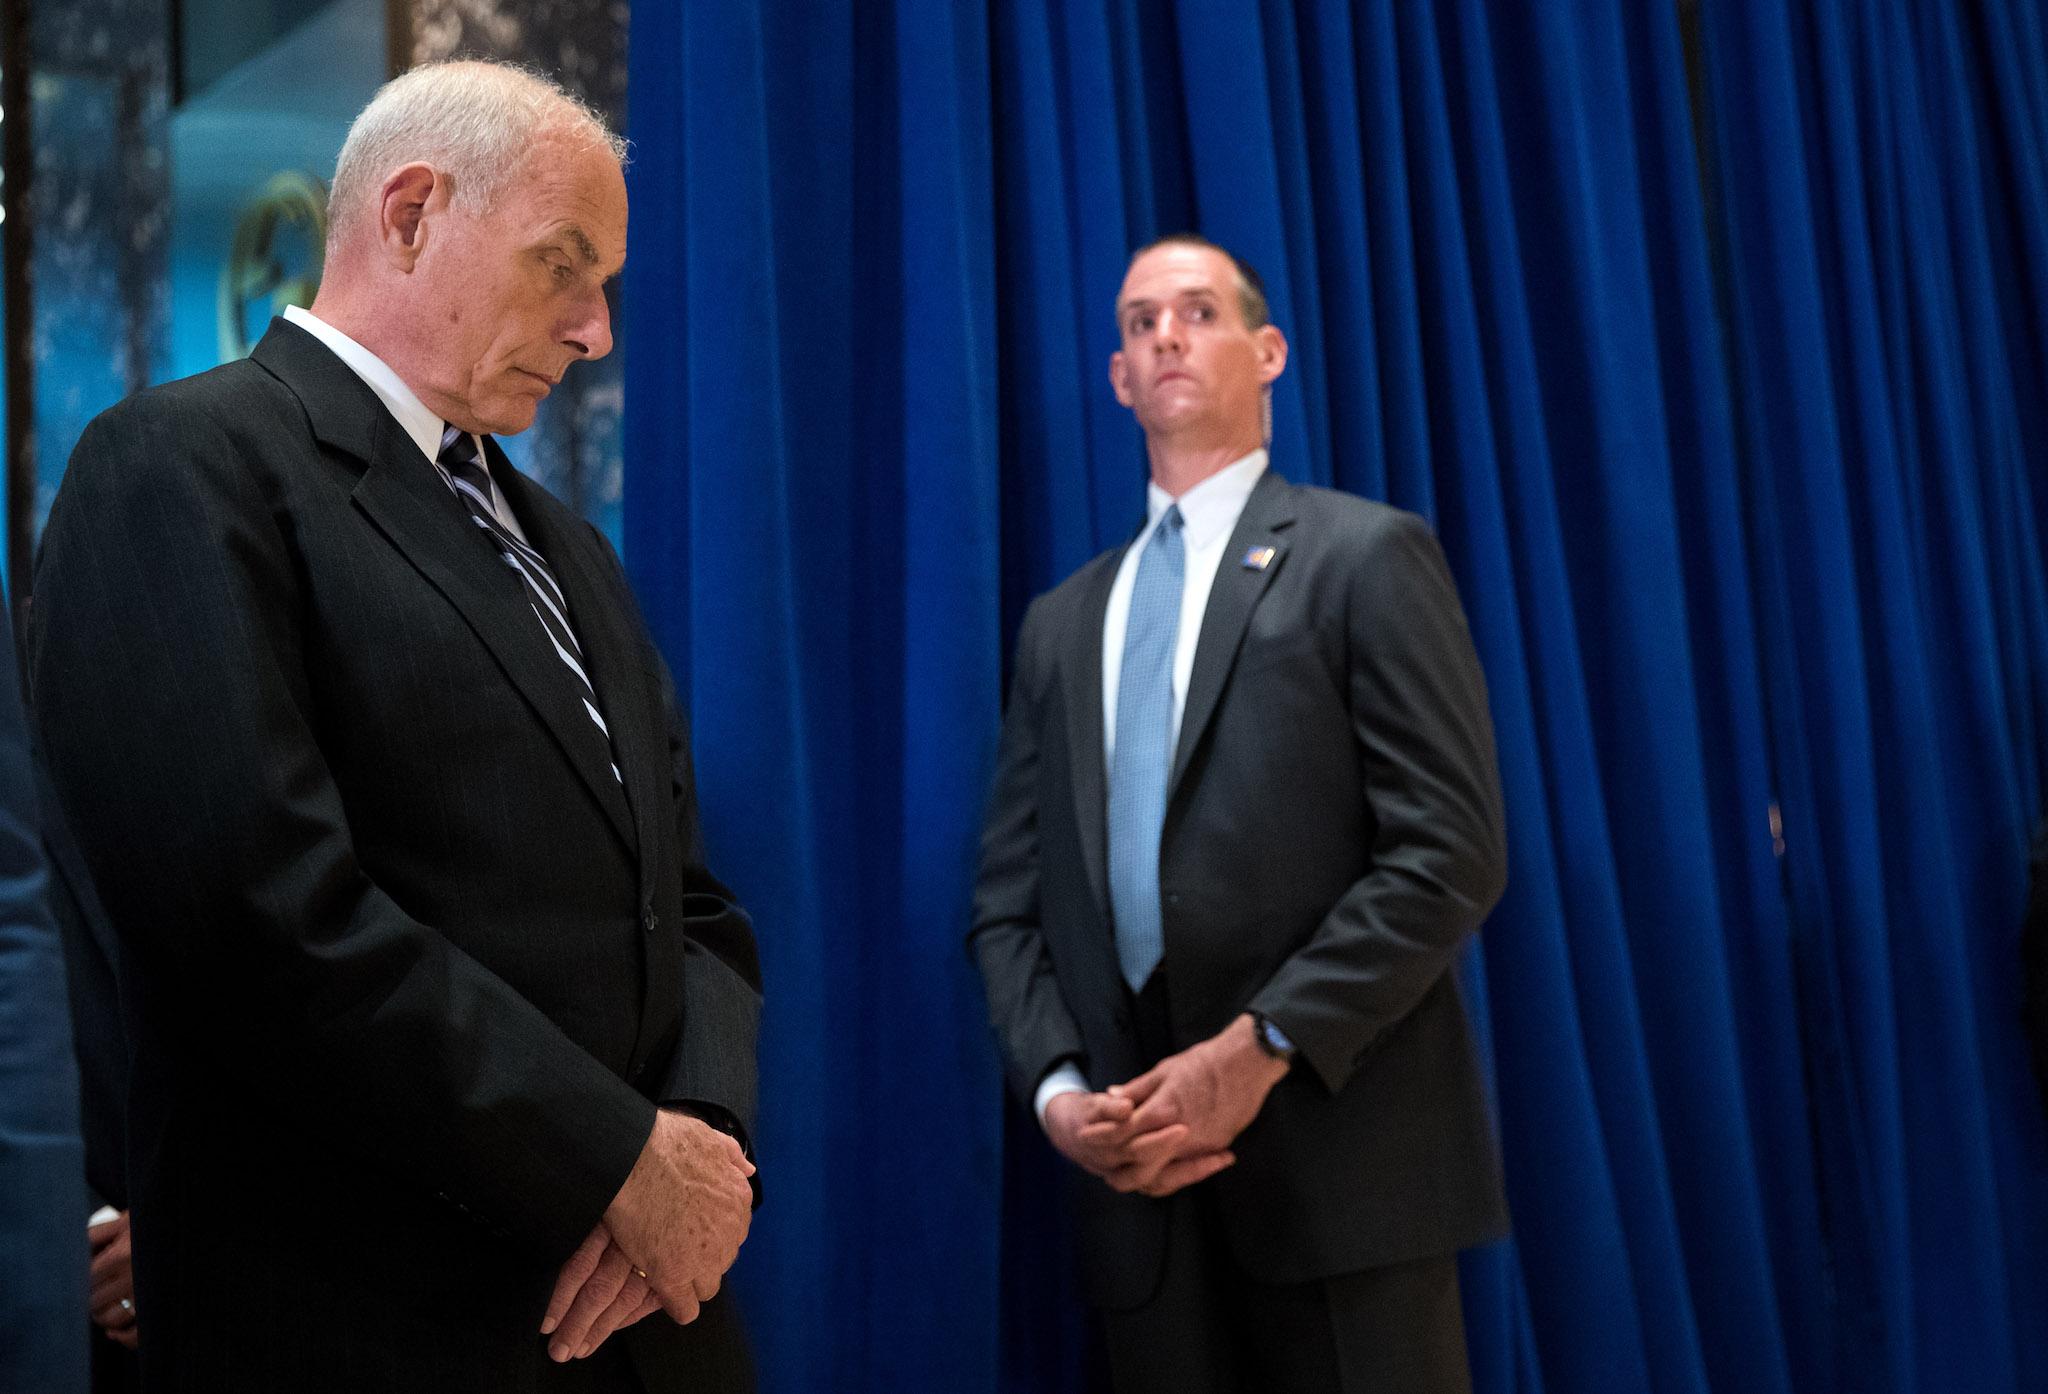 White House Chief of Staff Gen. John Kelly looks on as US President Donald Trump speaks following a meeting on infrastructure